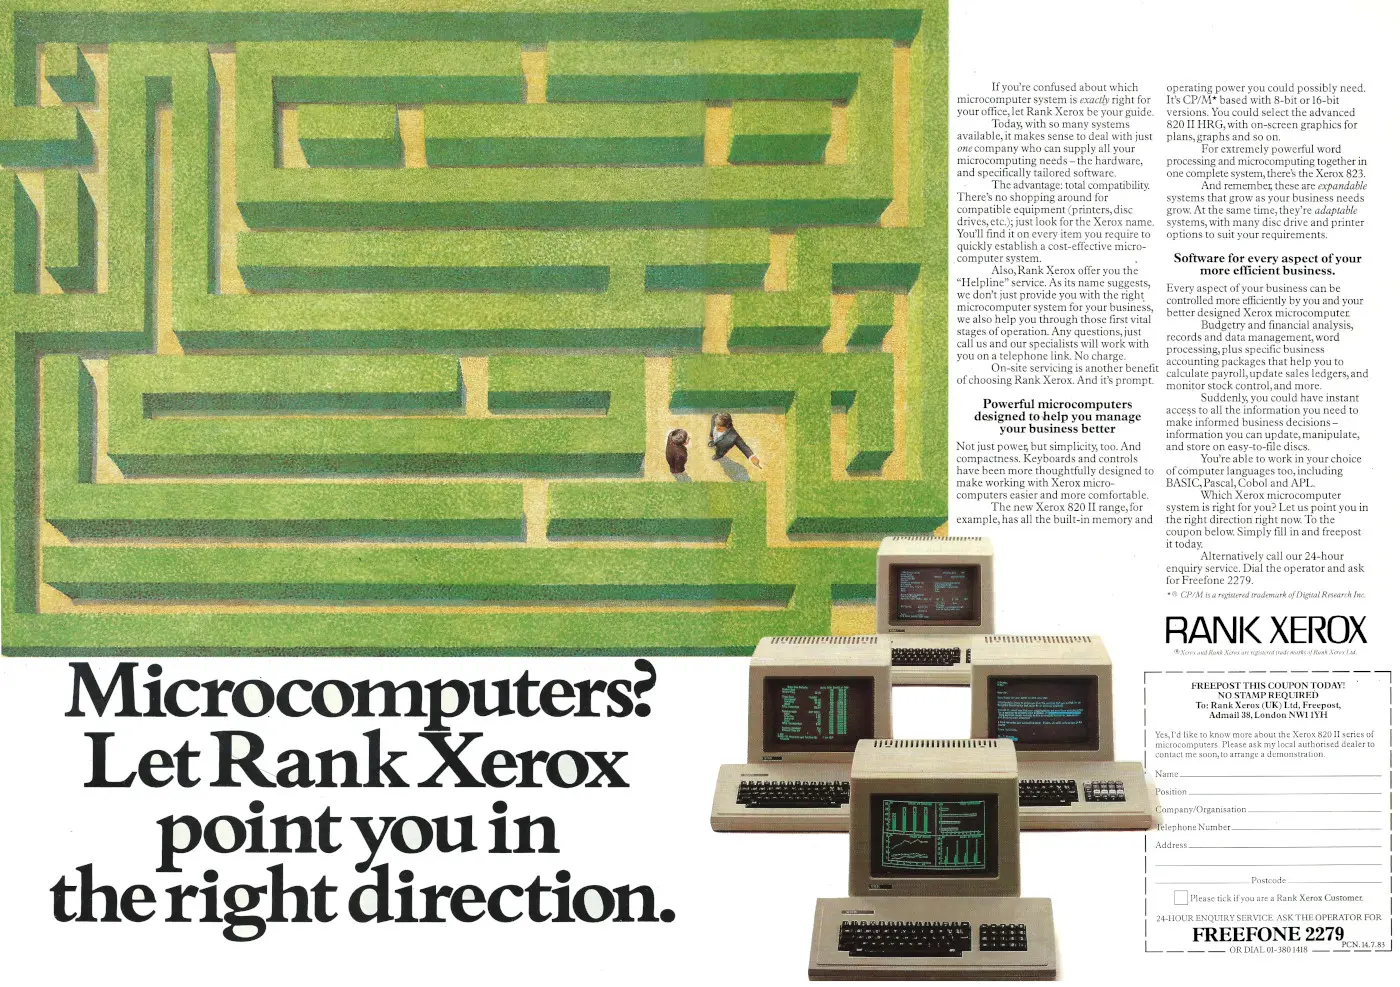 Rank Xerox Advert: <b>Microcomputers? Let Rank Xerox point you in the right direction</b>, from Personal Computer News, 14th July 1983